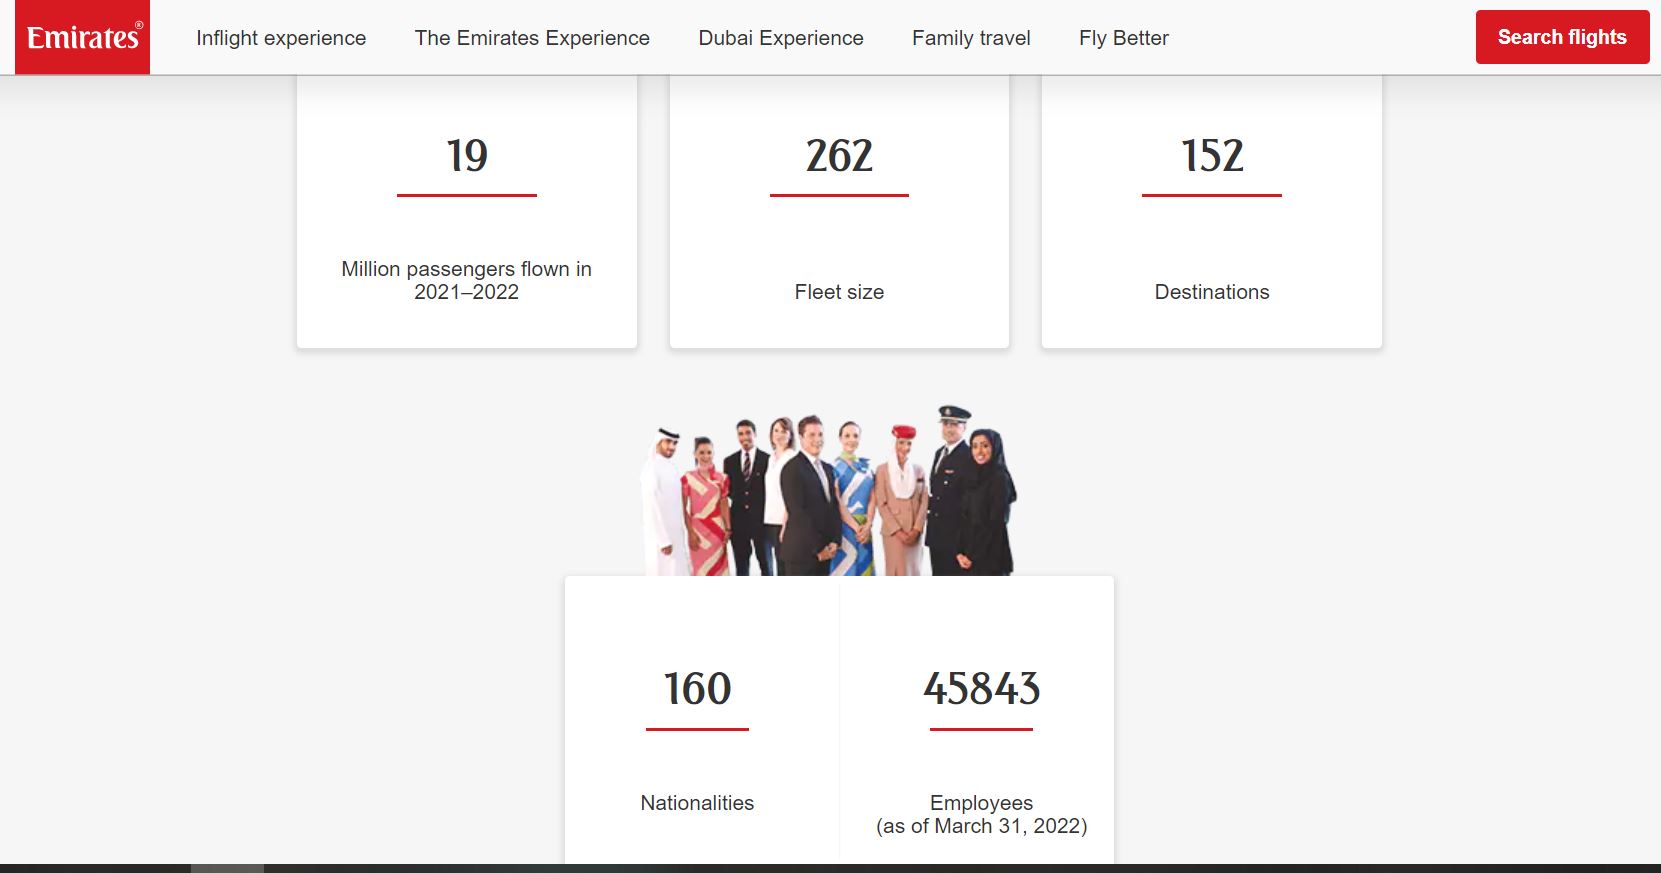 Emirates Figures as of 31March 2022